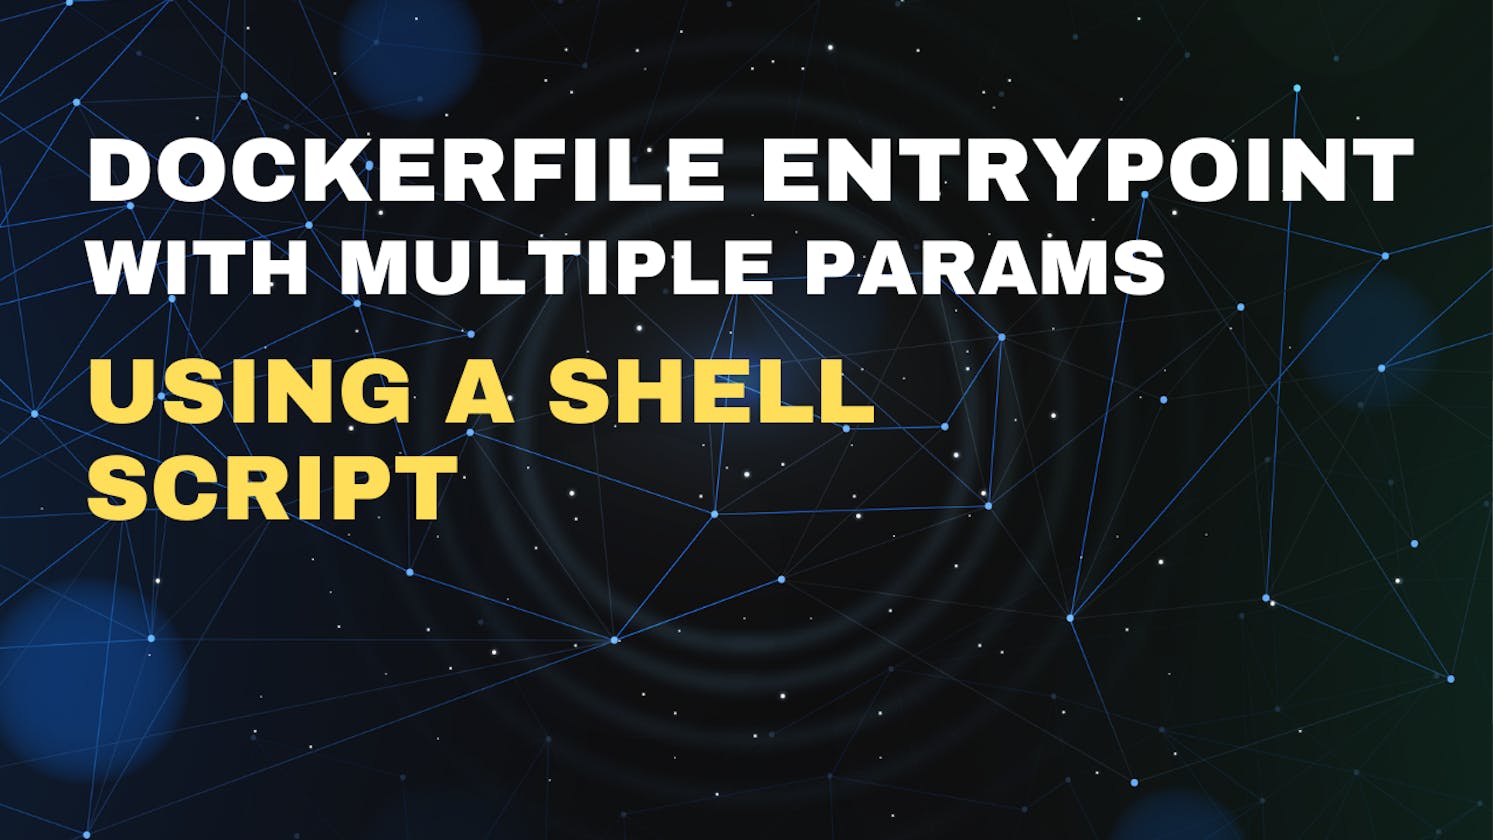 Dockerfile Entrypoint with multiple params using a shell script